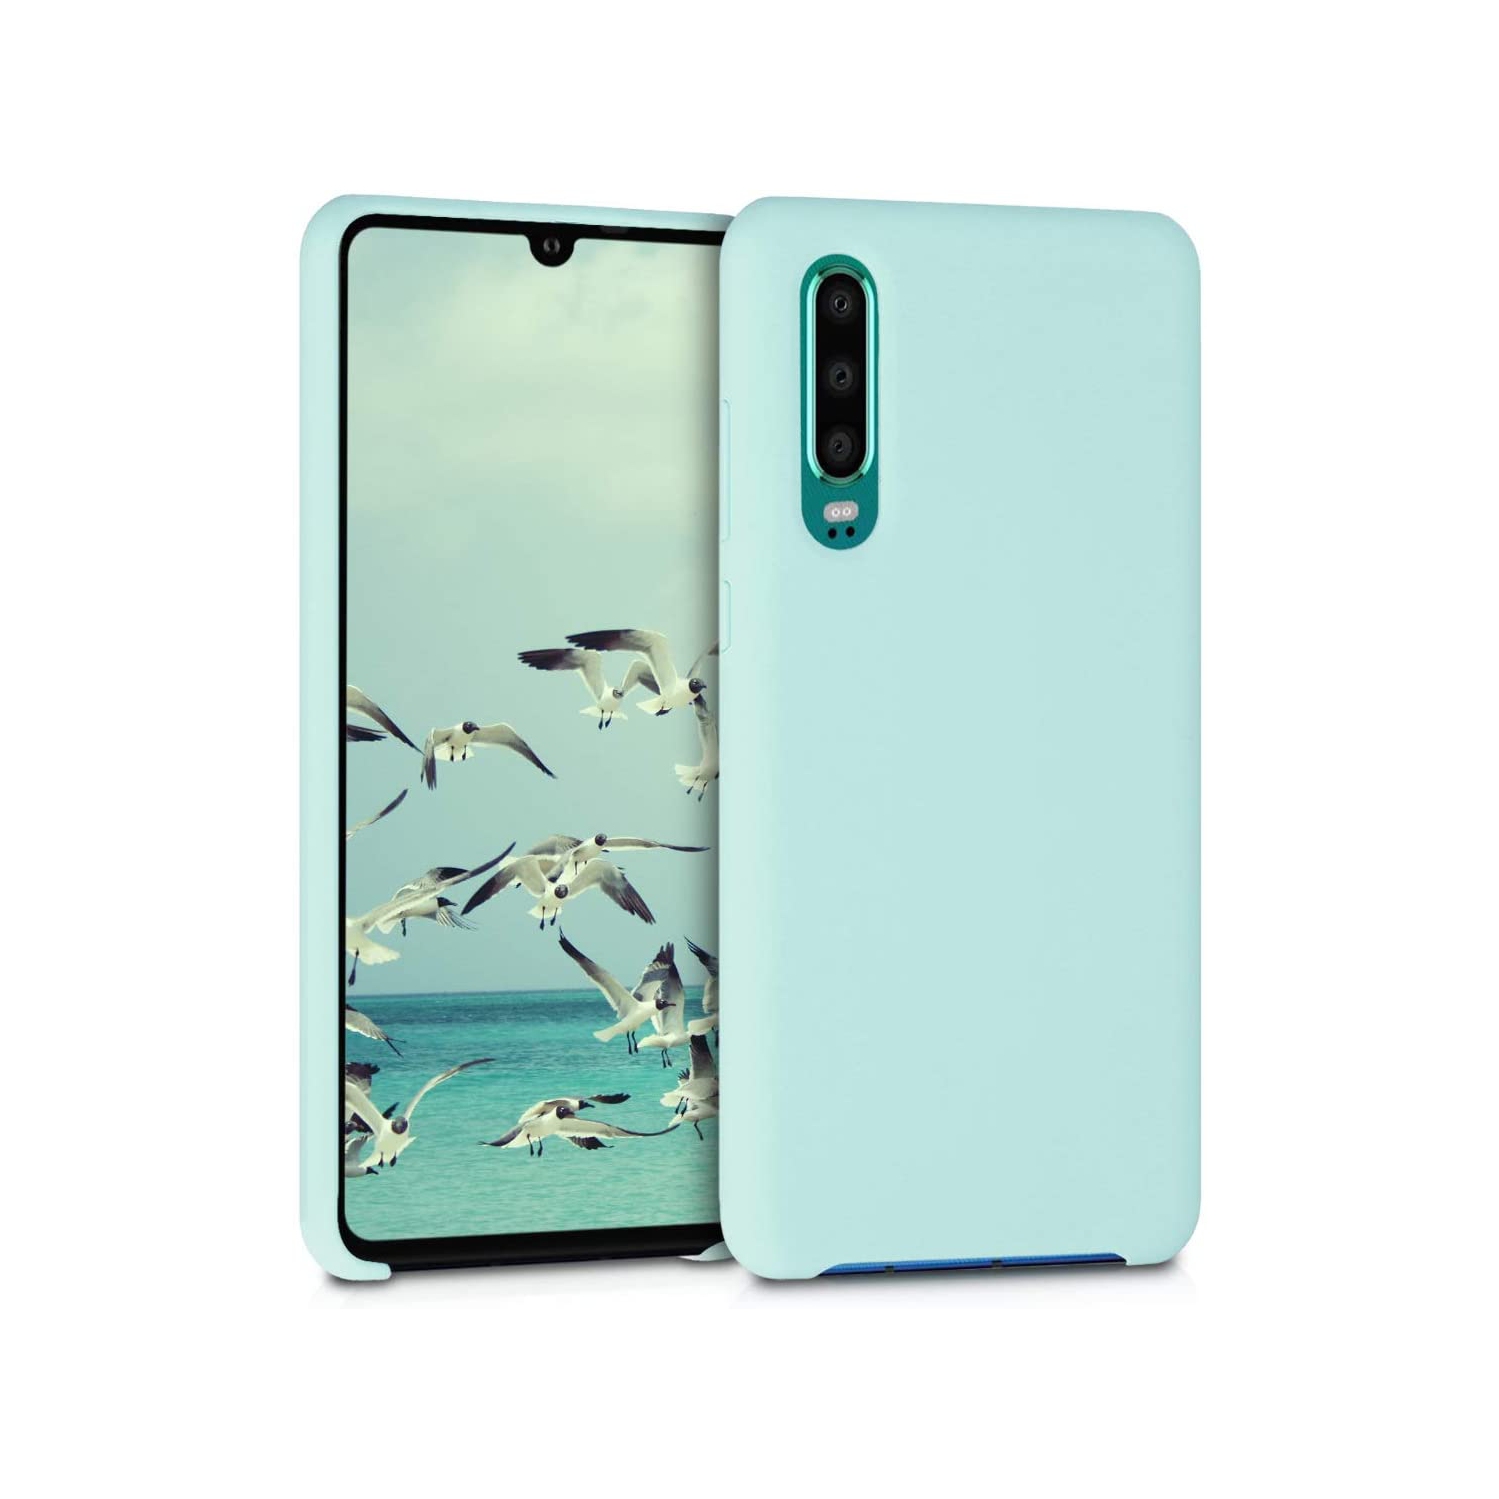 TPU Silicone Case Compatible with Huawei P30 - Case Slim Phone Cover with Soft Finish - Mint Matte